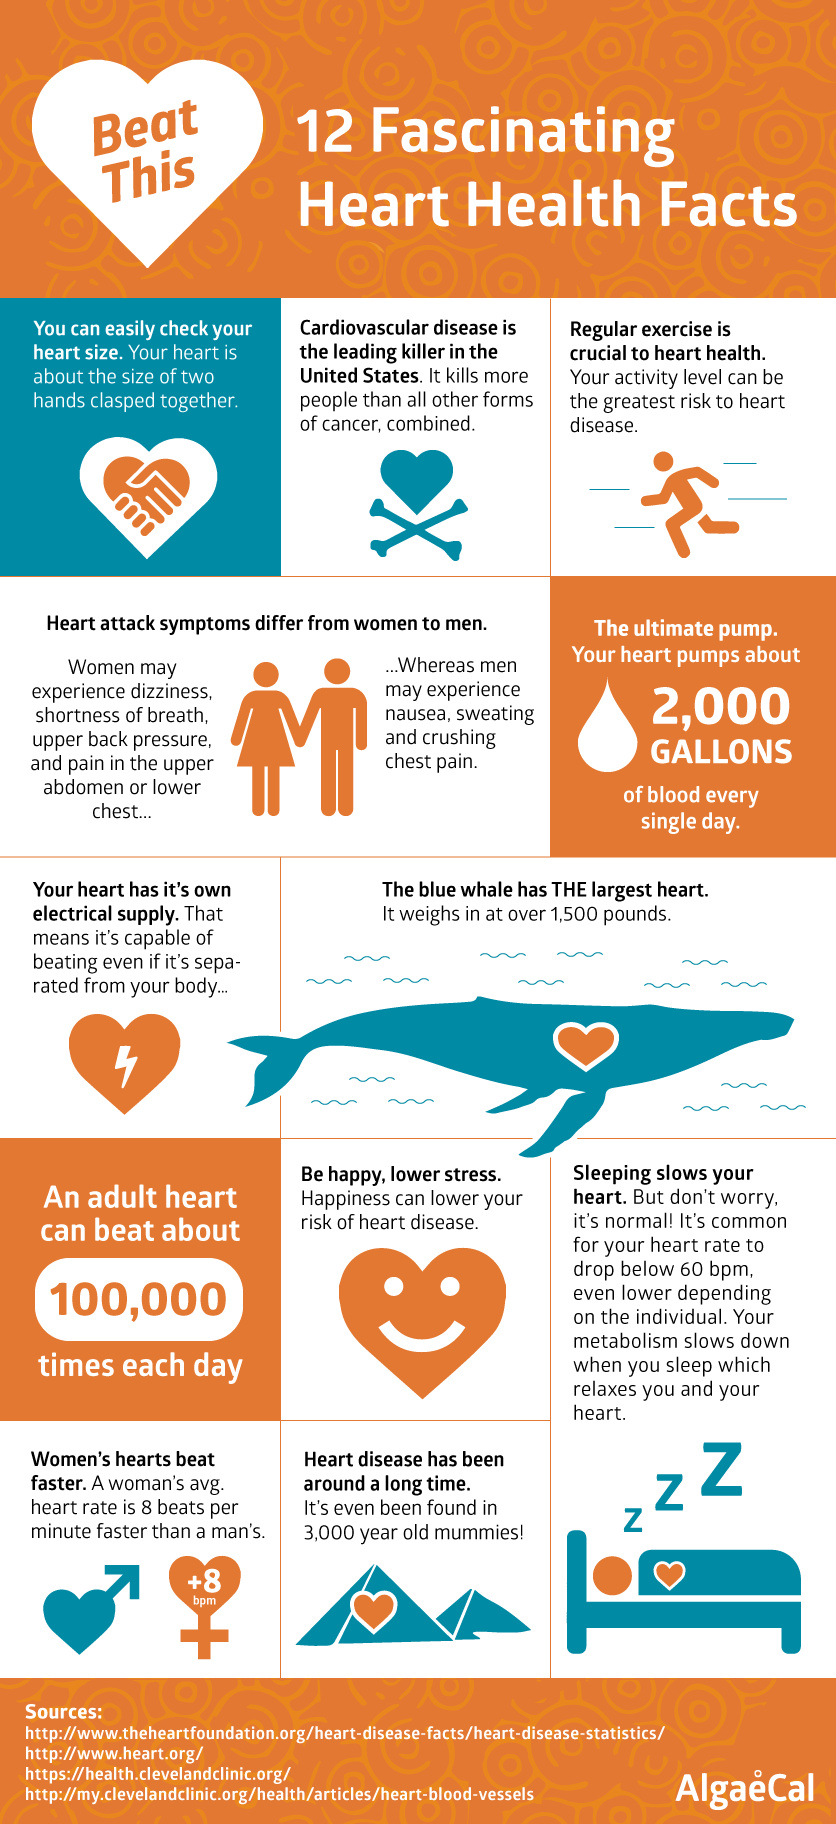 What are some facts about heart disease?